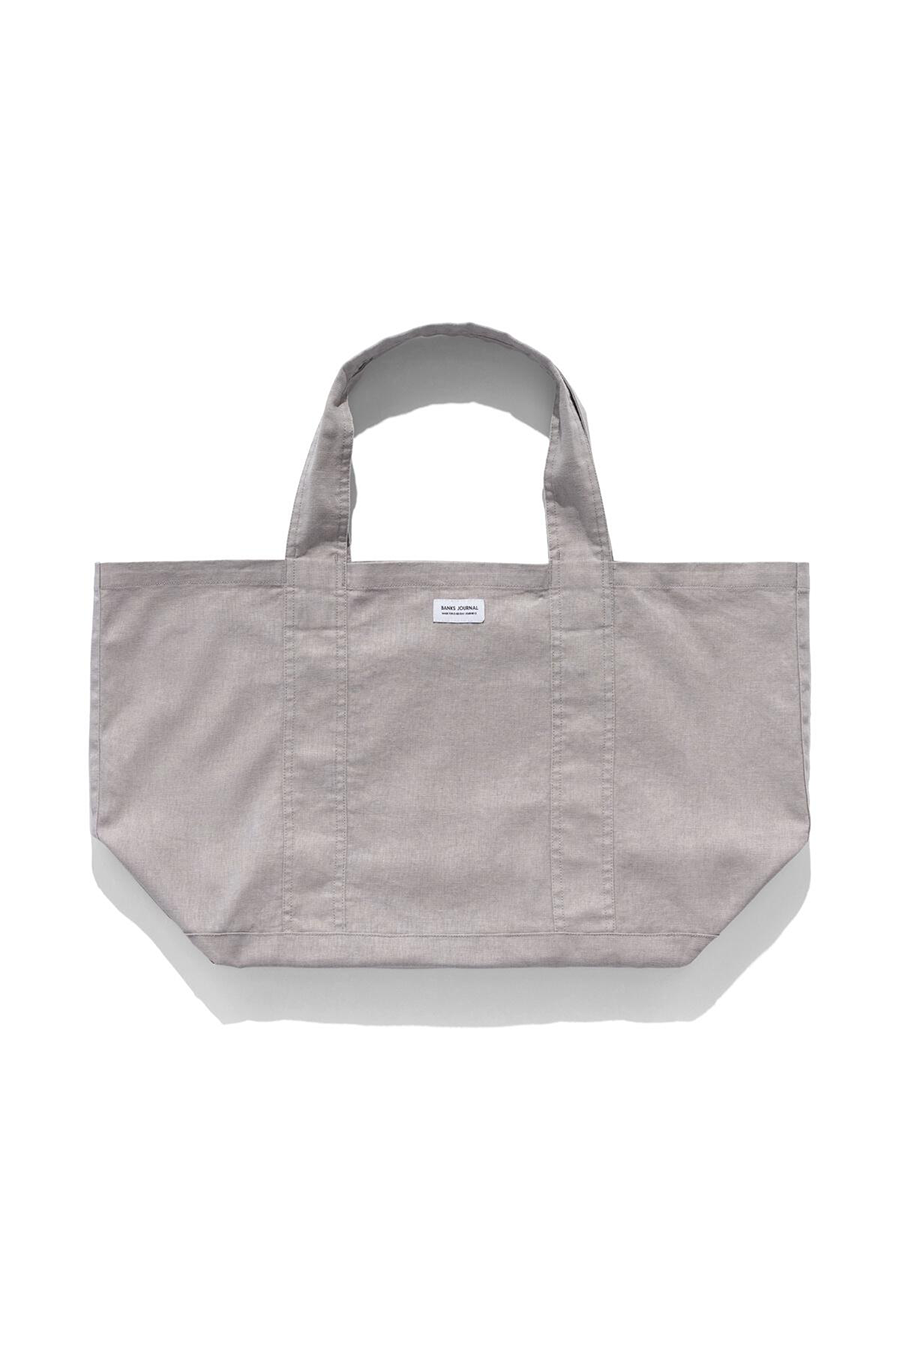 Pathway Tote Bag | Washed Grey - Main Image Number 1 of 1